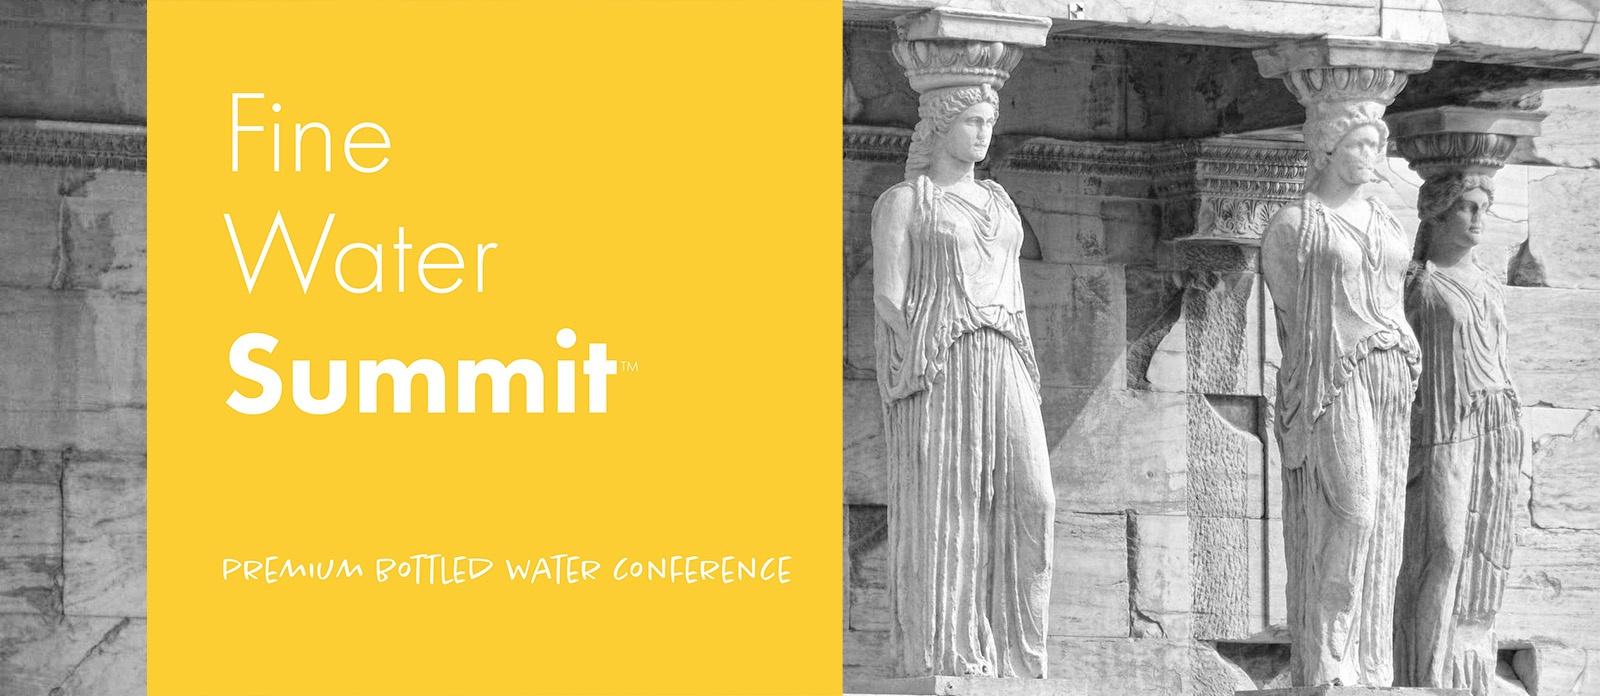 Fine Water Summit 2023 The Global Premium Bottled Water Conference